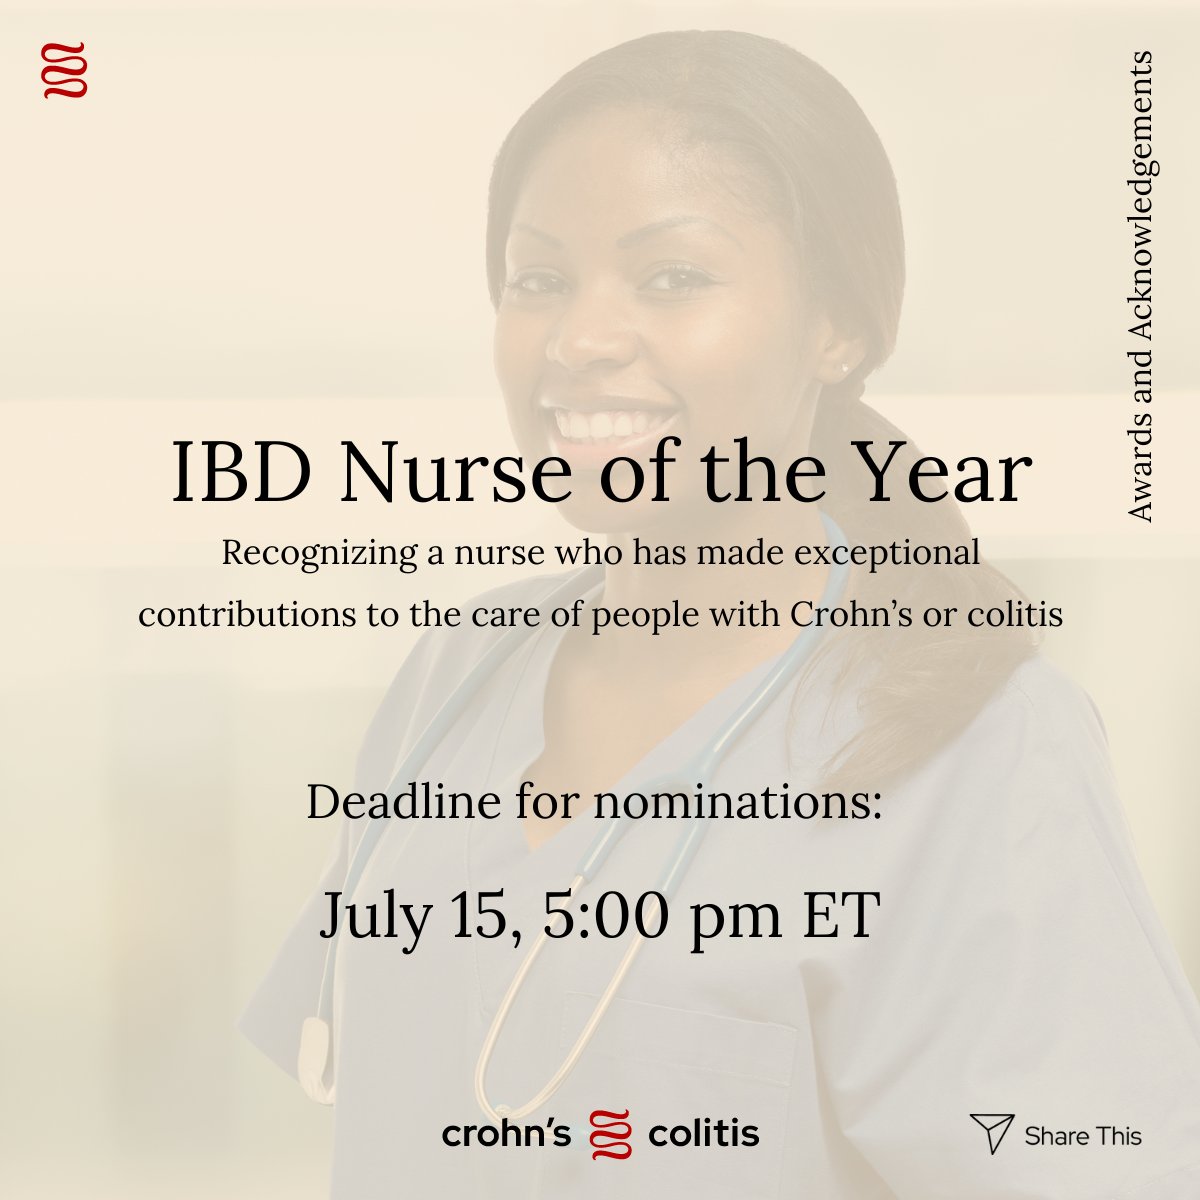 It’s National Nursing Week and you can recognize excellent care! The Outstanding IBD Nurse of the Year Award honours a remarkable nurse who has made exceptional contributions to the care of patients with Crohn’s or colitis.   Nominate here: bit.ly/NOTYA